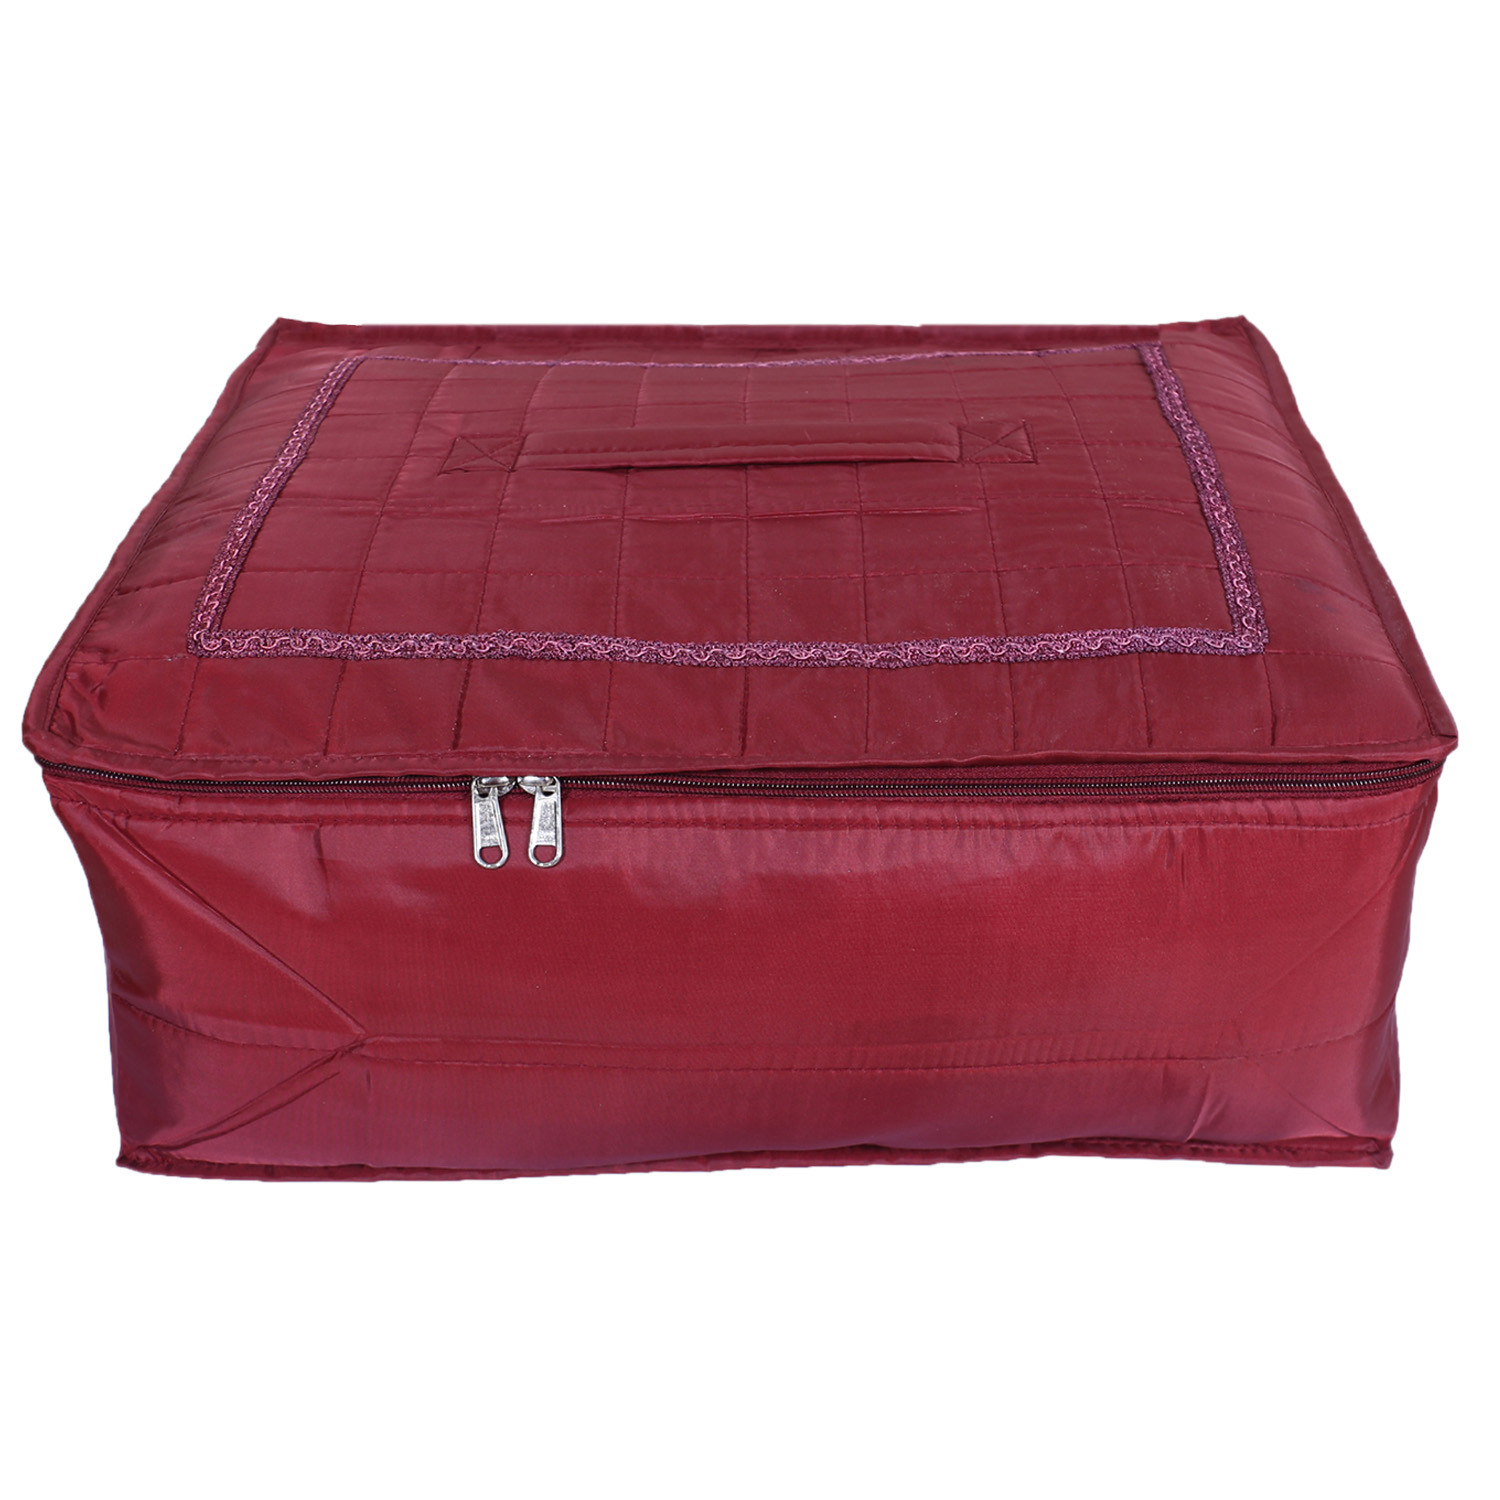 Kuber Industries Designer Saree Cover|Parachute Foldable Clothes For Home & Traveling|With Transparent Window Extra Large,(Maroon)